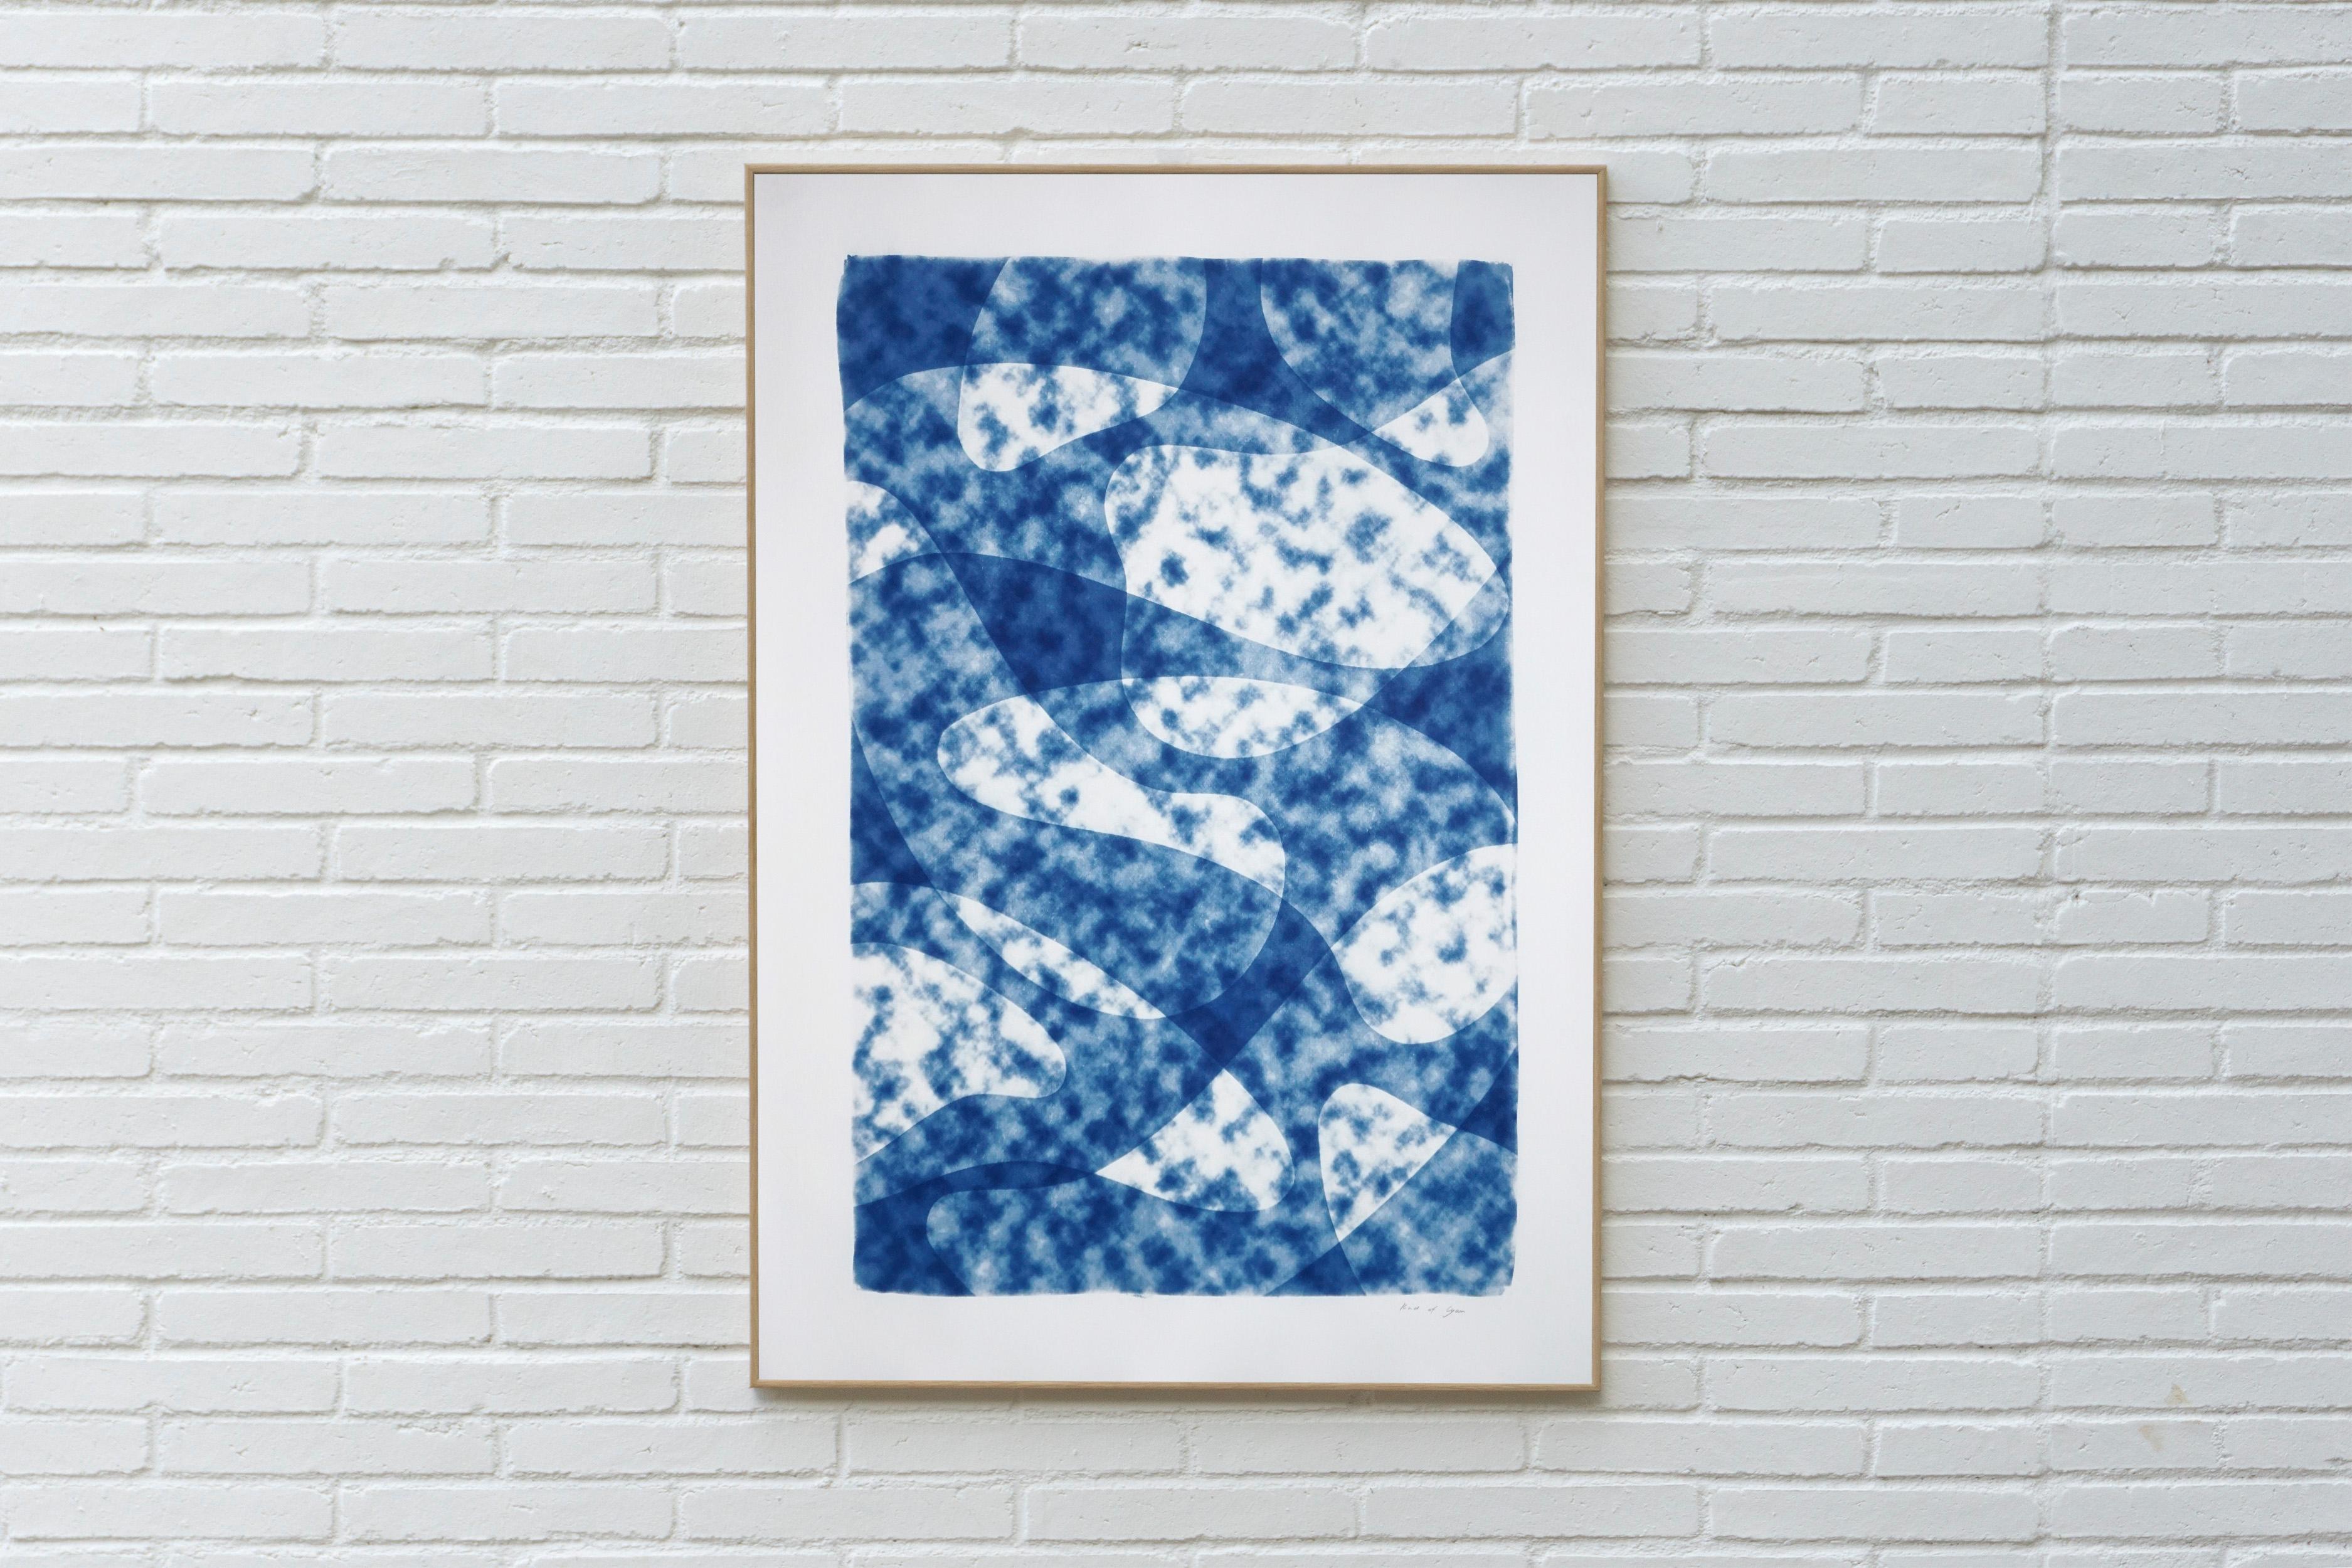 Looking Up at The Clouds, Unique Monotype in Blue Tones, Avant-Garde Shapes  - Print by Kind of Cyan